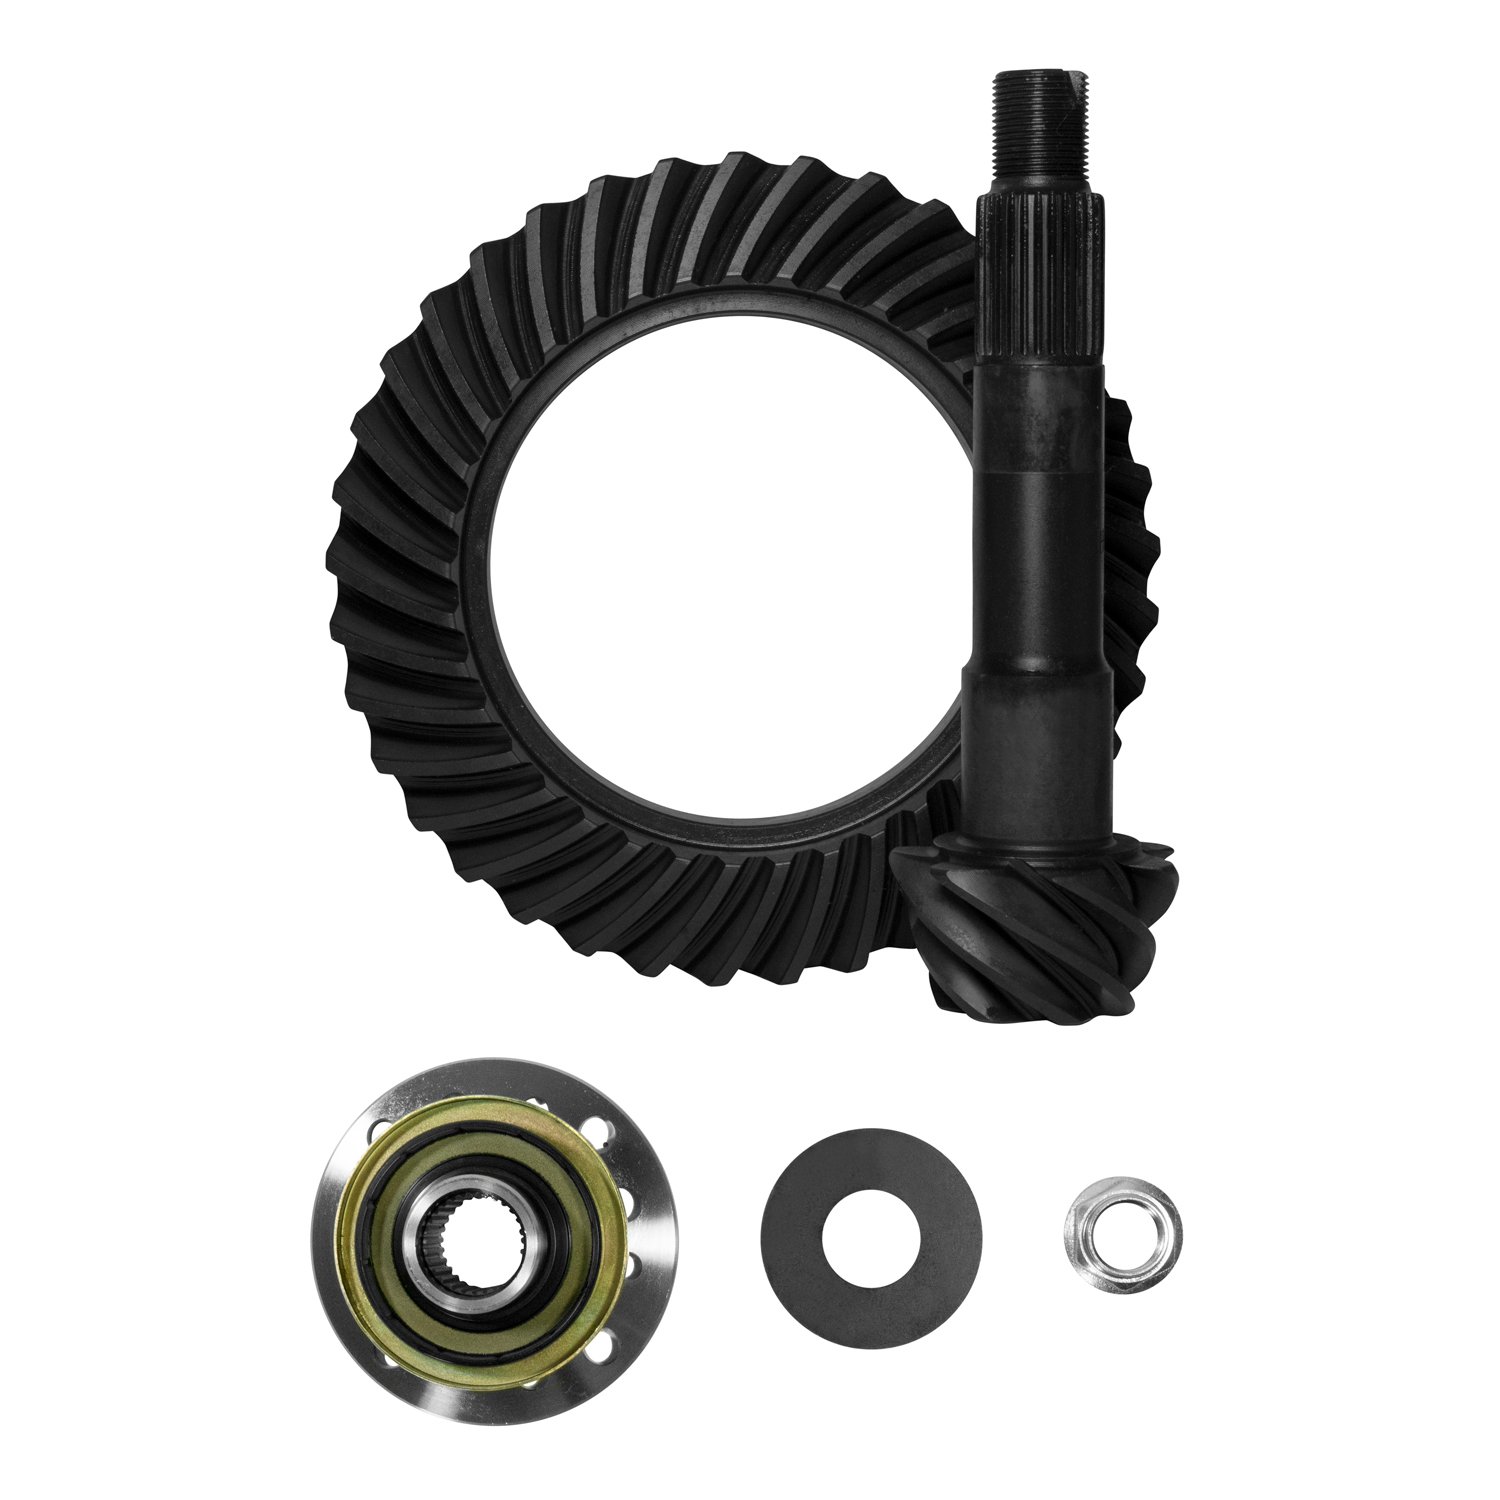 USA Standard ZG T8-571K Ring & Pinion Gear Set, For Toyota 8 in., 5.71 Ratio